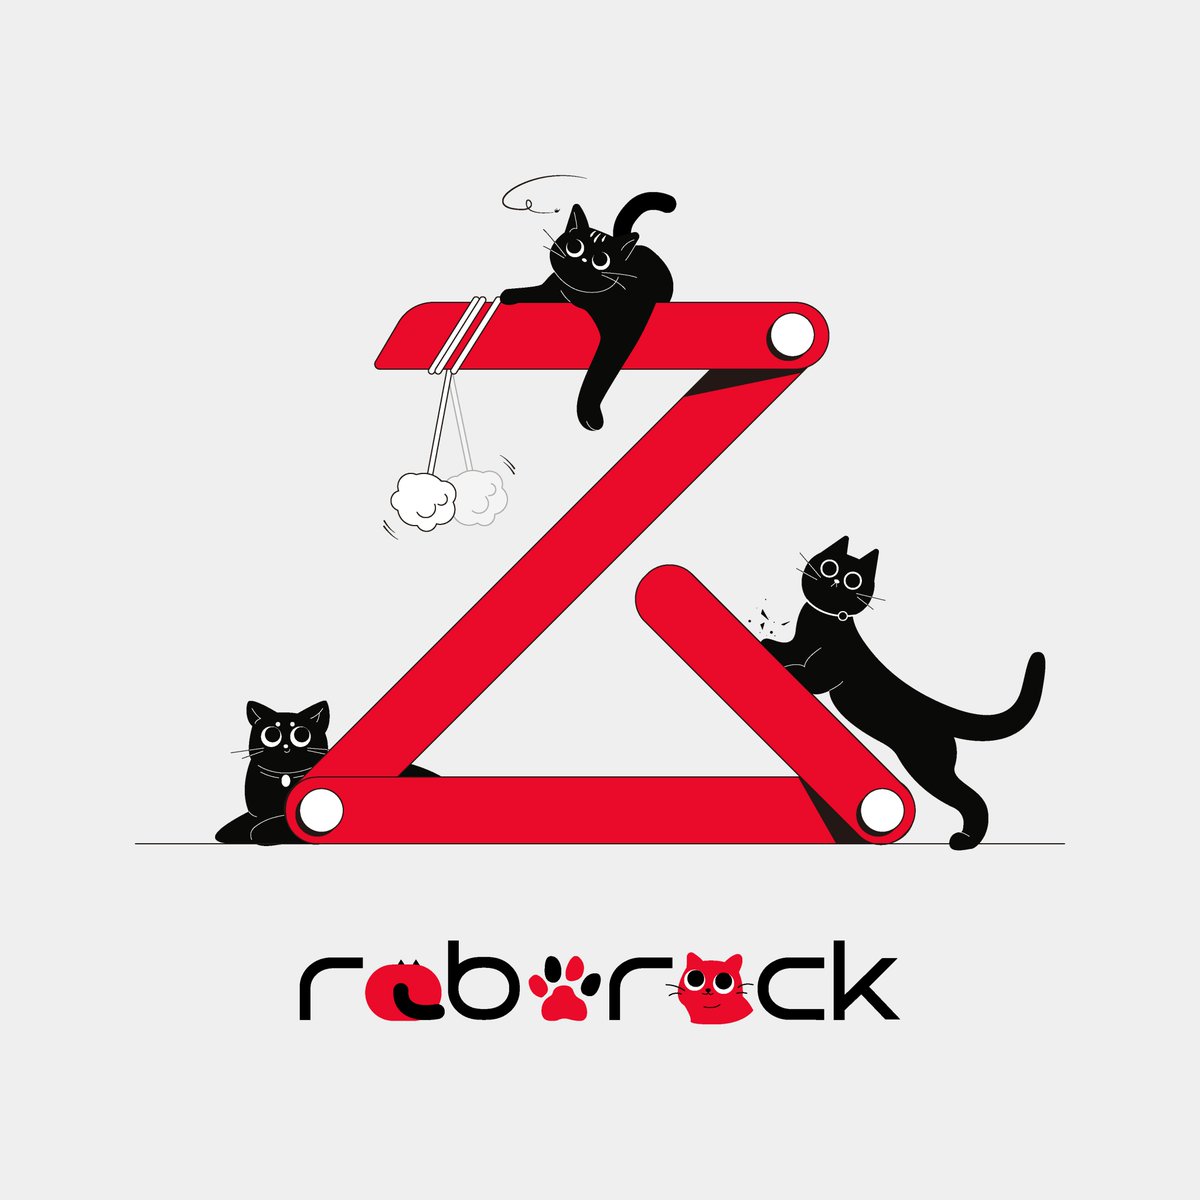 Is anyone else's cat in the habit of knocking things over 'accidentally'? Come to meet Roborock at CatCon in California and see how it handles messy moments like this. #PurrfectlyClean #roborock